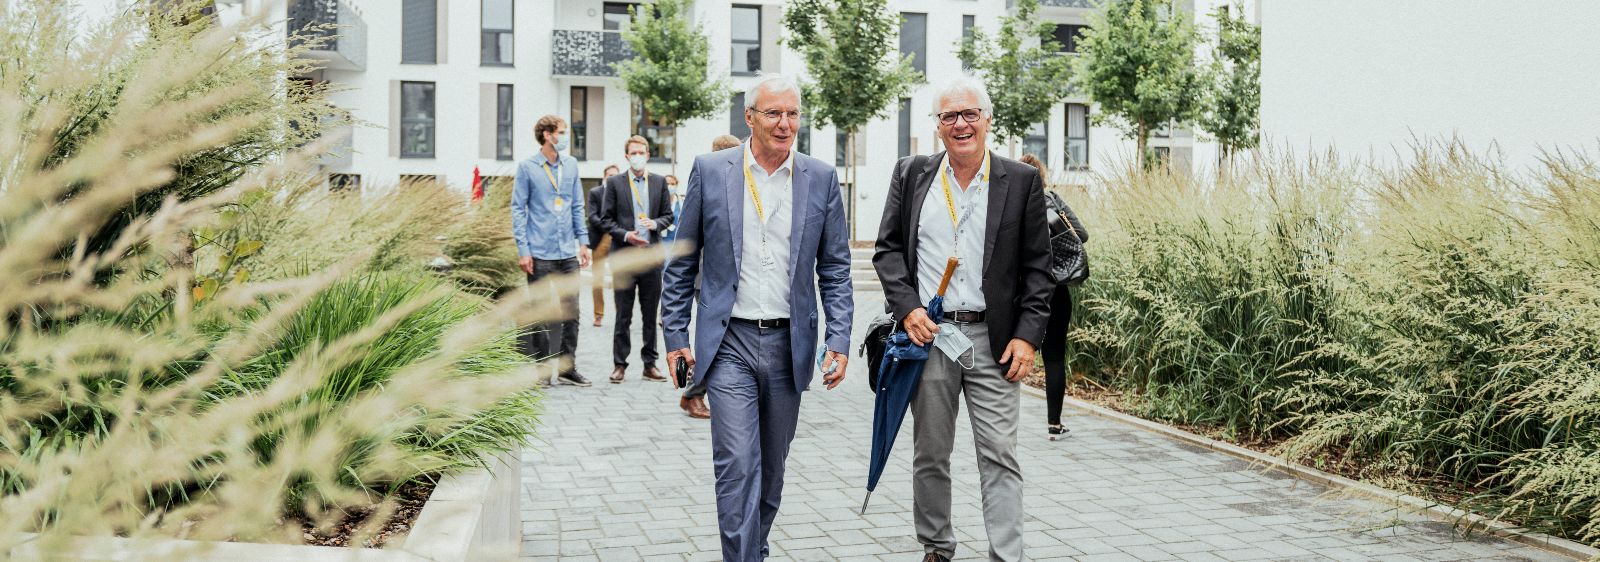 Making the “Neue Weststadt” project possible: Lord Mayor of Esslingen Dr. Jürgen Zieger (left) and project leader Professor Manfred Fisch from the Steinbeis Innovation Center energieplus.